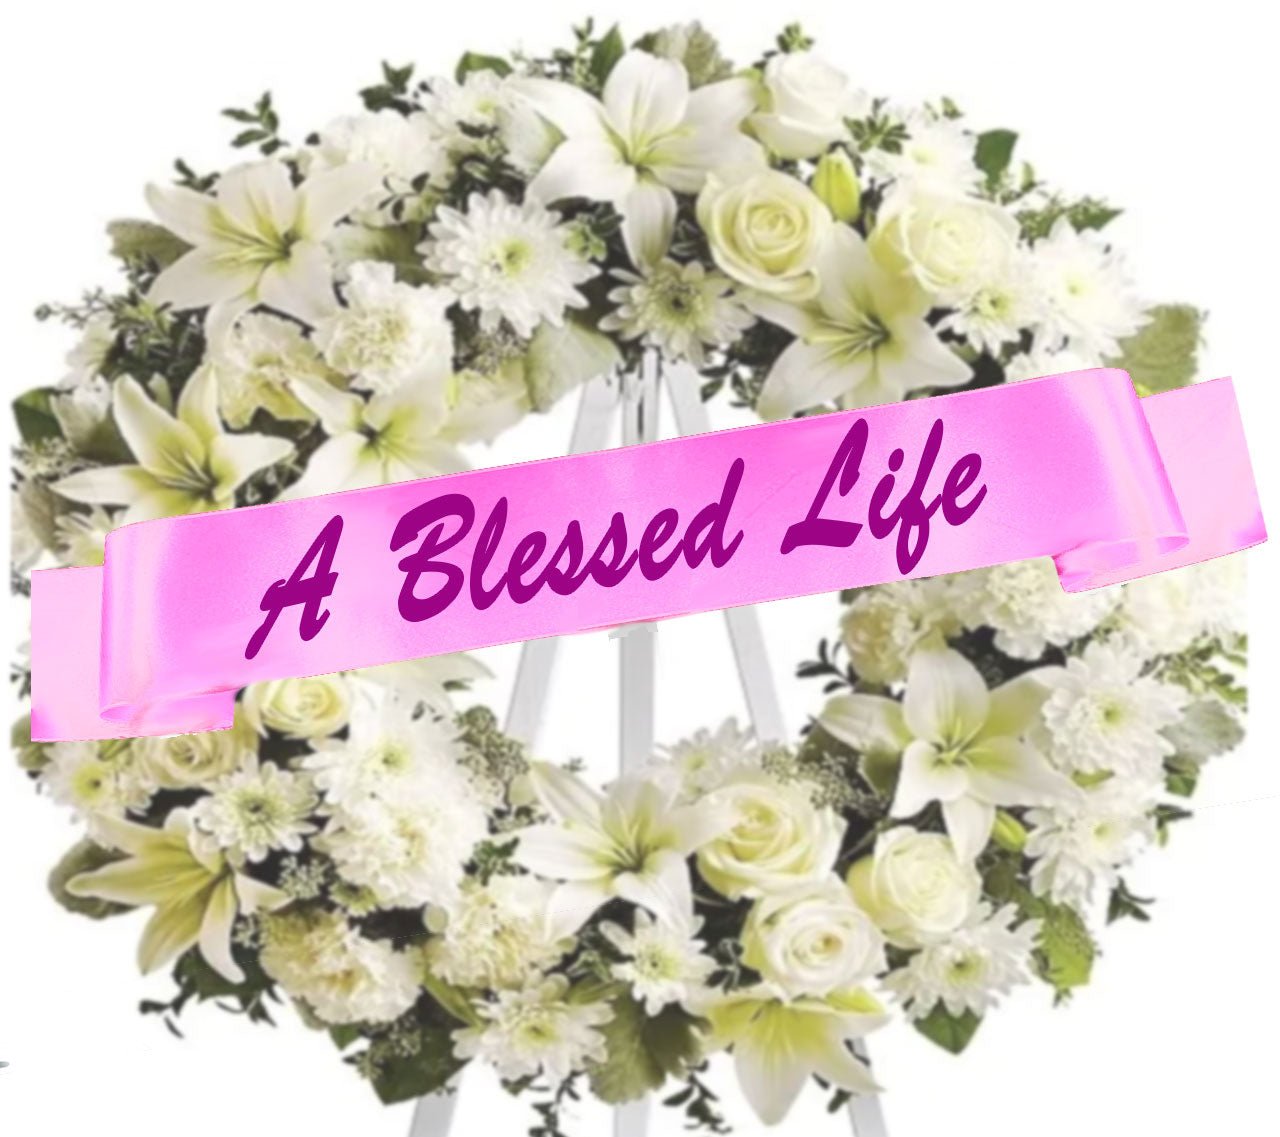 Blessed Life Funeral Flowers Ribbon Banner - Celebrate Prints